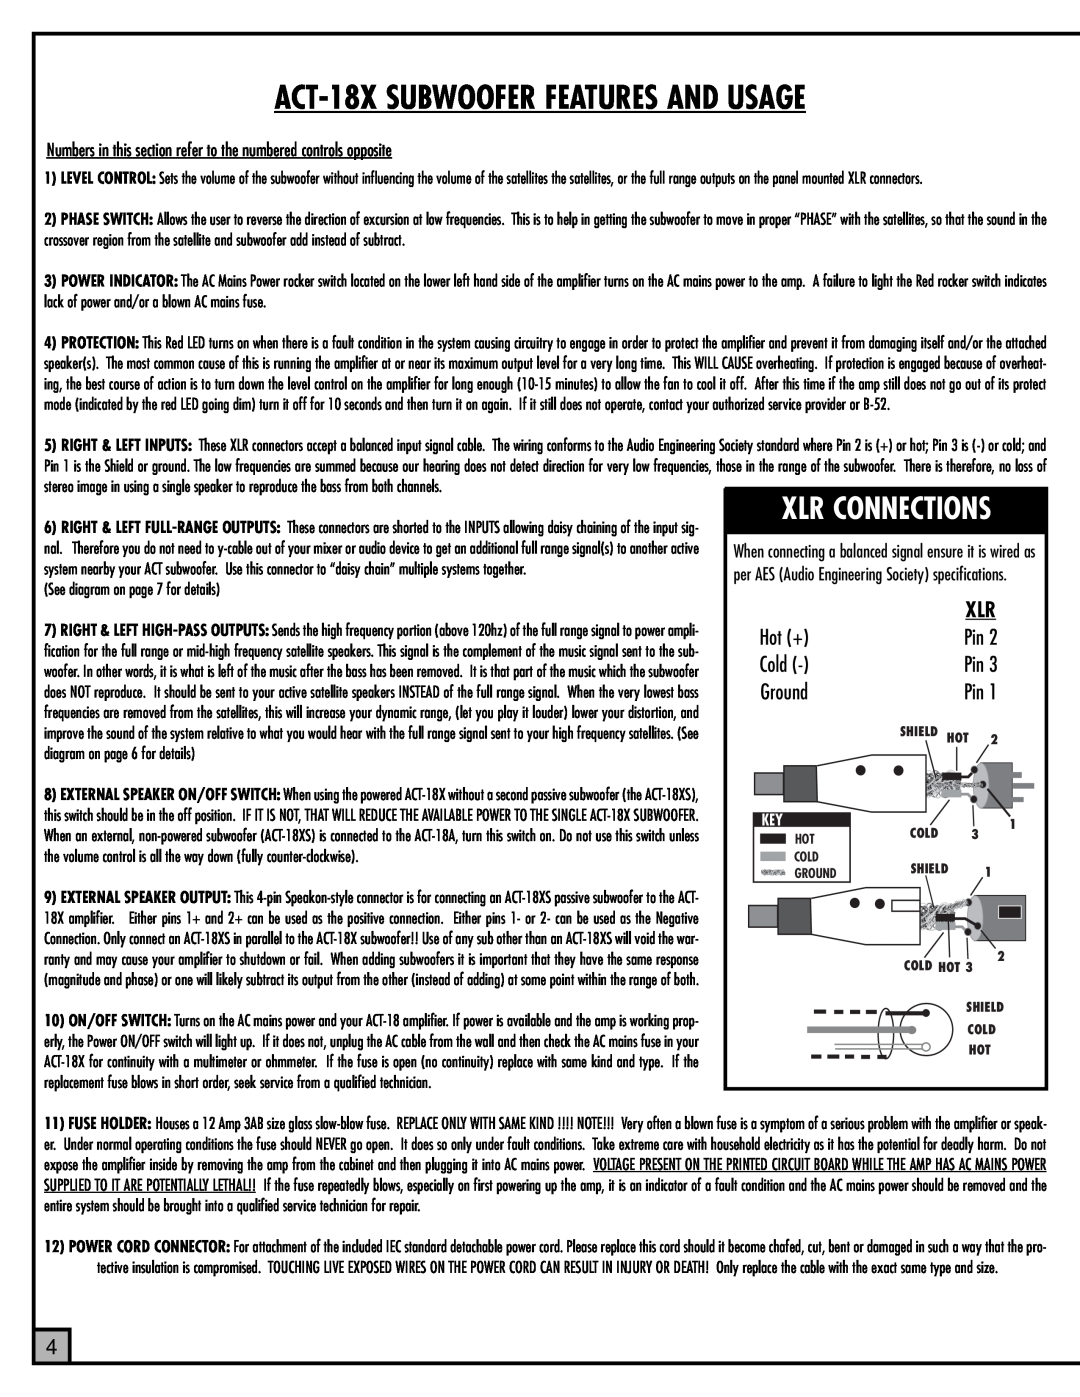 ETI Sound Systems, INC manual Hot +, Cold, Ground, ACT-18XSUBWOOFER FEATURES AND USAGE, Xlr Connections 